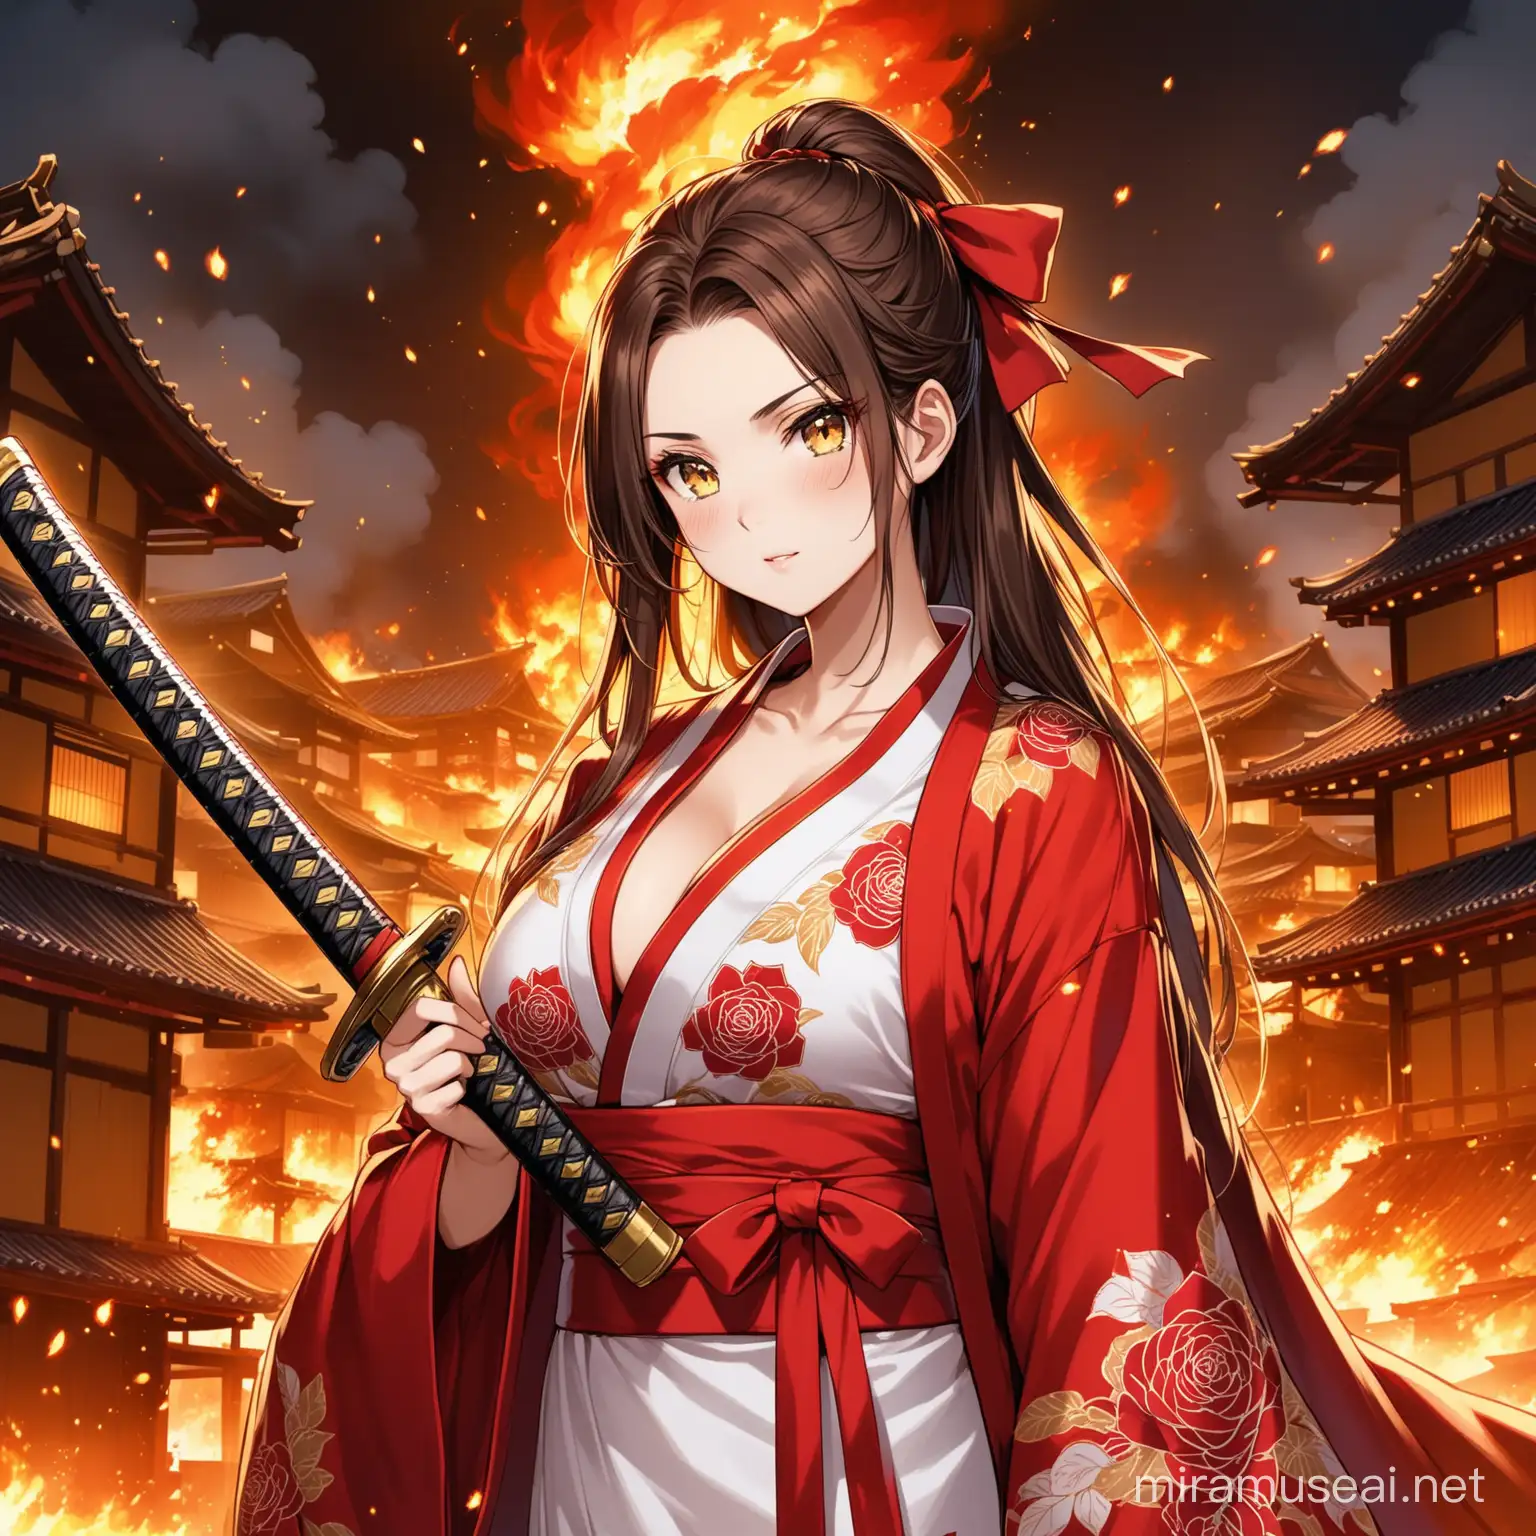 A 19 year old looking girl with brown long hair. With a red ribbon on the pony. She is wearing a red and white hewlan kimono. She have big boobs. She have yellow eyes. Above her wrist she have a tattoo of an elegant rose. In her hand she is holding a red themed glorious katana. Above her hewlan kimono she is hanging a white-golden-red themed coat like cape, like navy Admirals wear. Scorching flame fragments small as little are coming out of her neck. Background is a burnt massacred samurai town in night